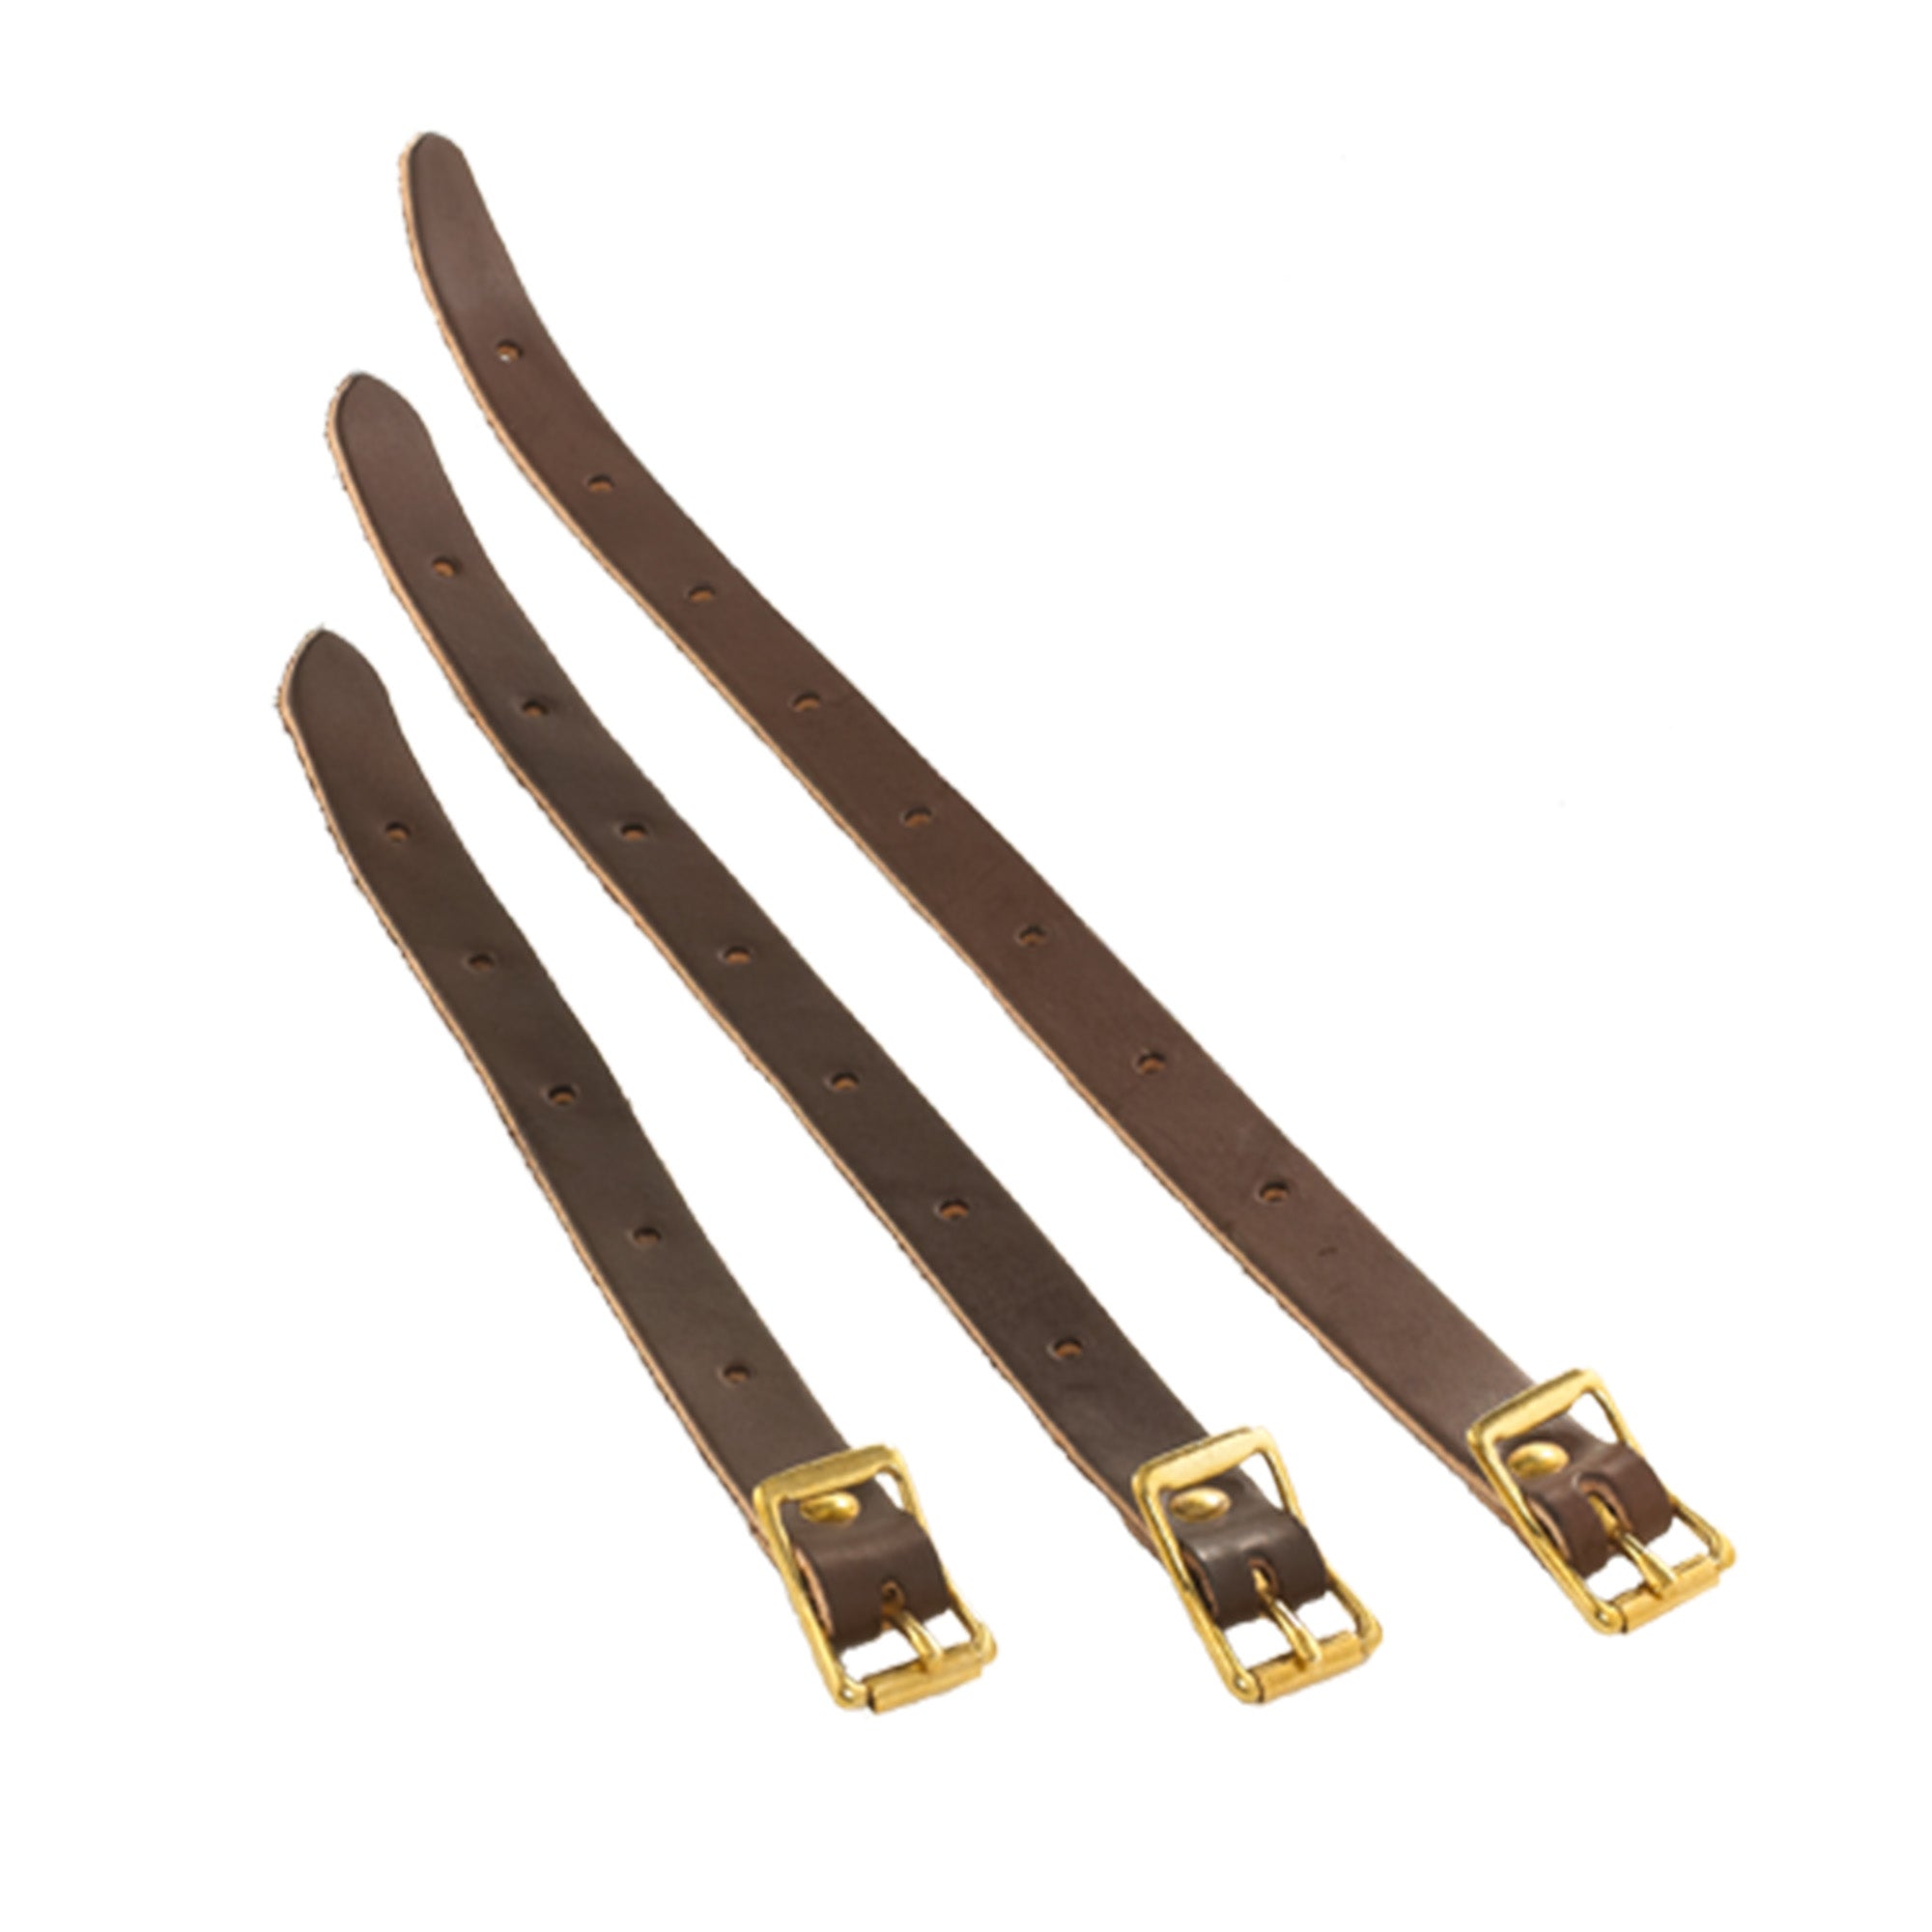 I can't find purse extender straps that are the right length - can